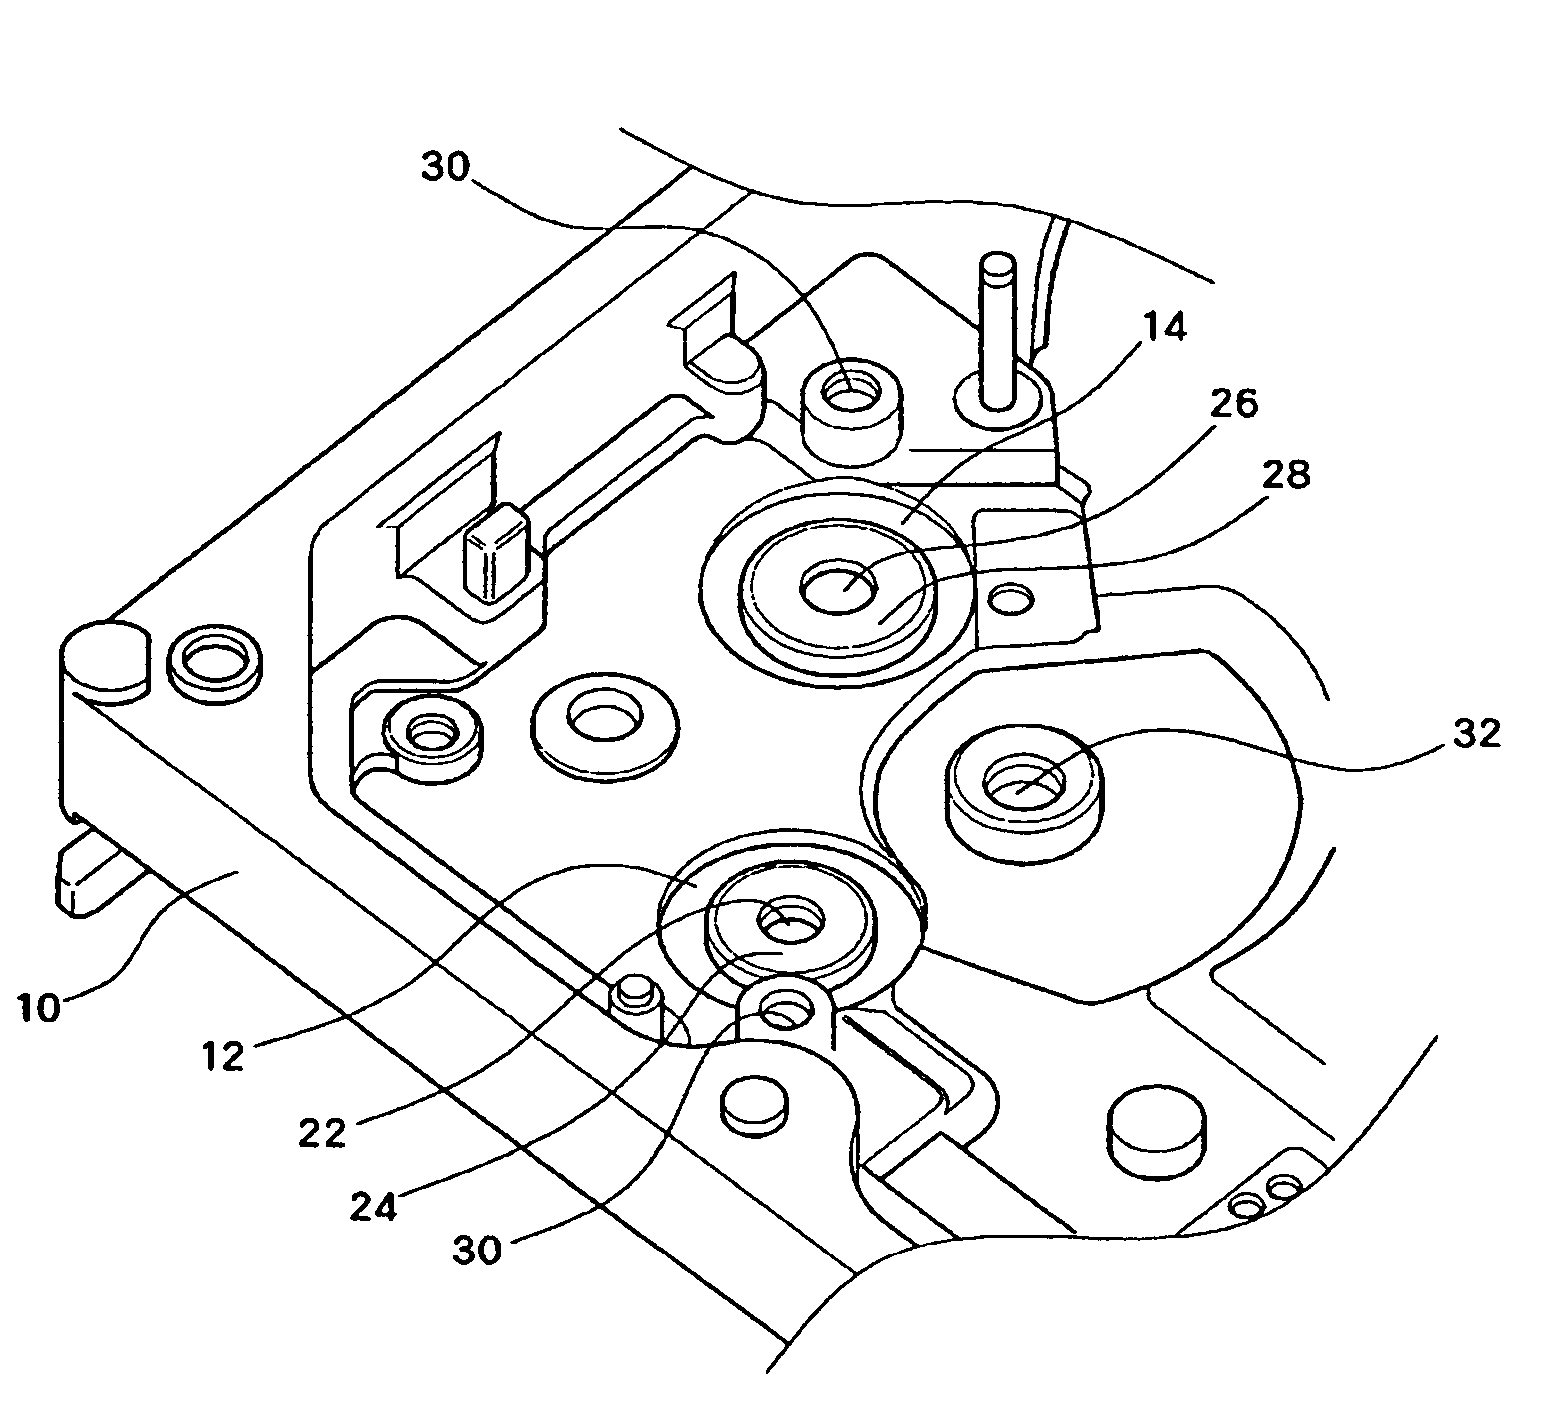 Hard disk drive adapted to prevent release of strain between voice coil motor and base